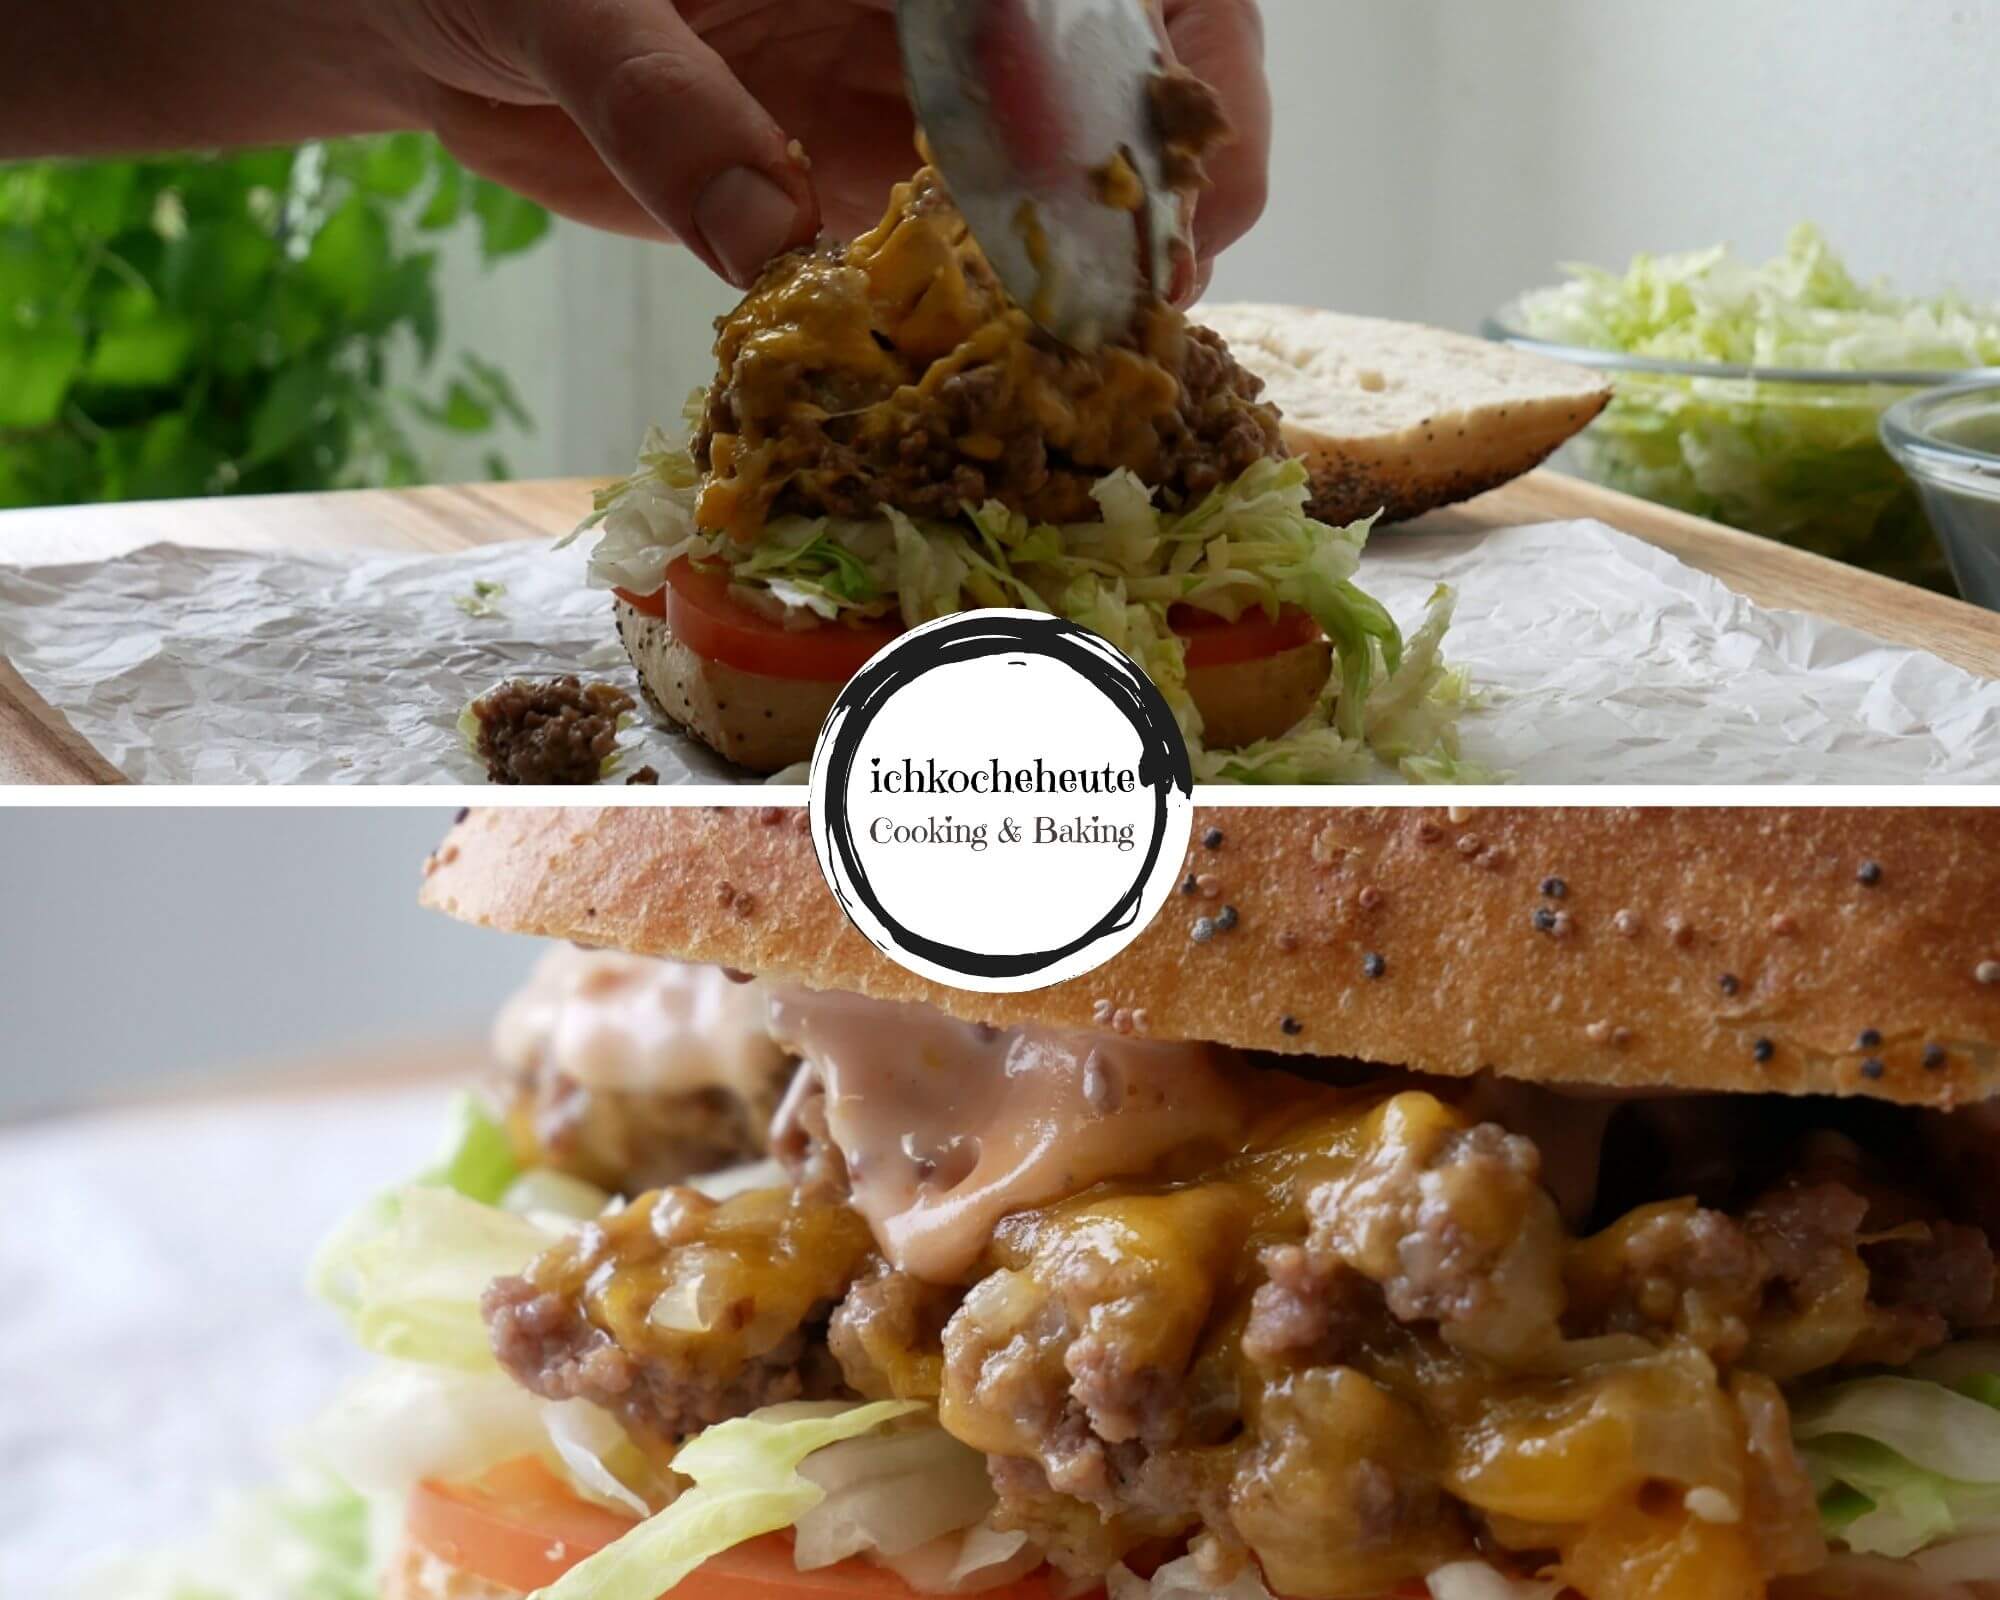 Serving Simple Cheeseburger Sandwiches